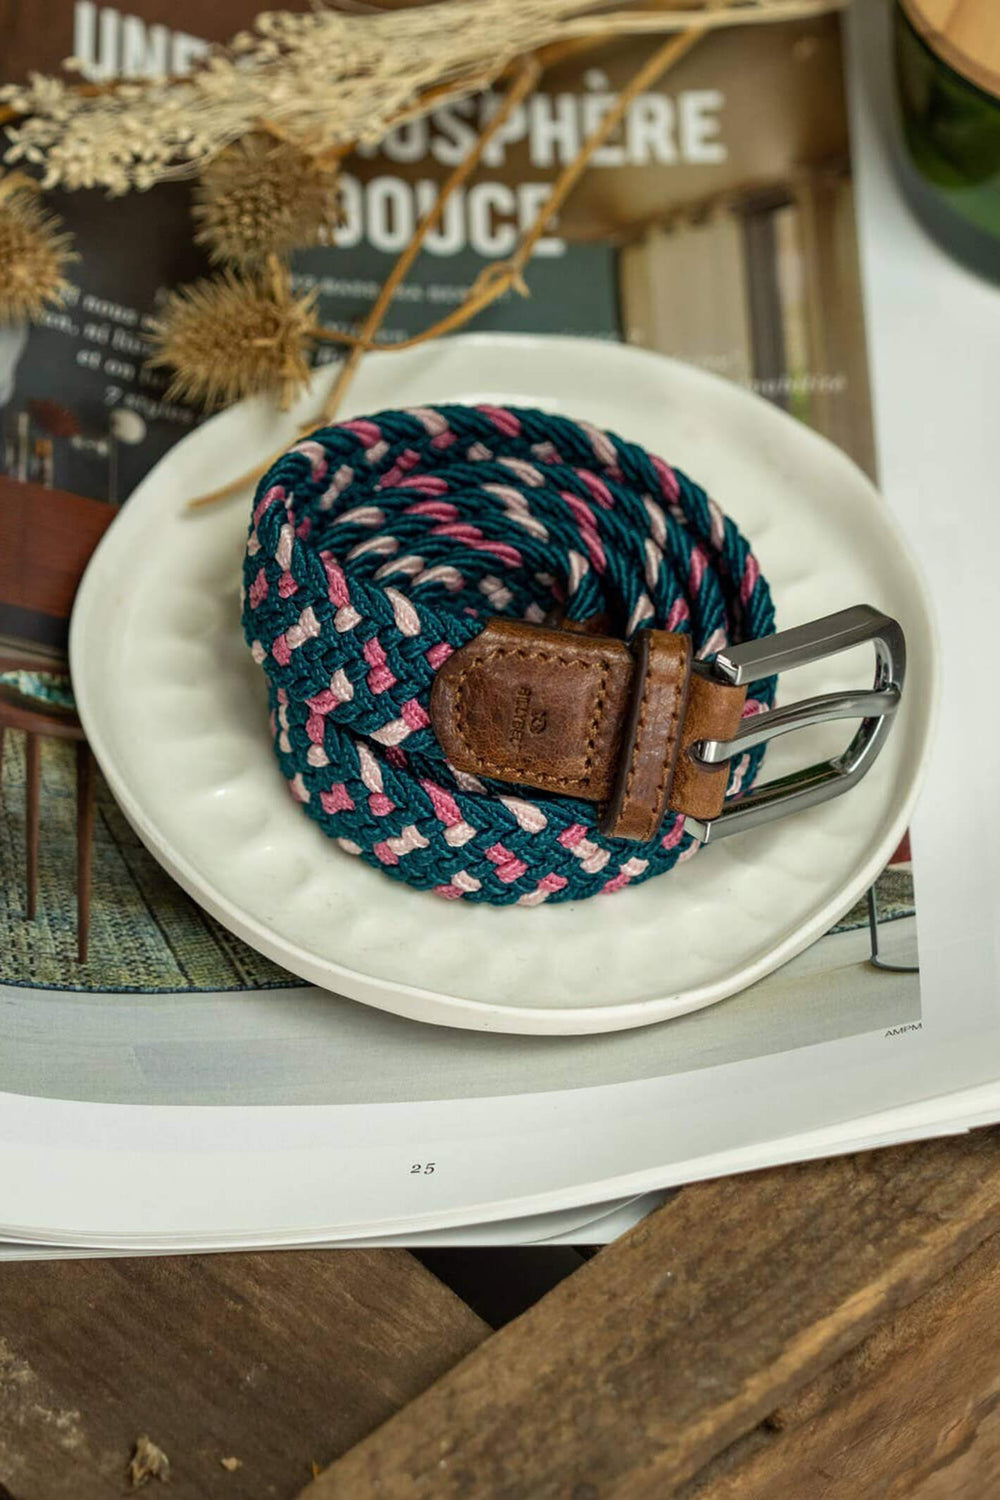 Billy Belt Teal & Pink Elasticated Woven & Leather Belt - Experience Boutique